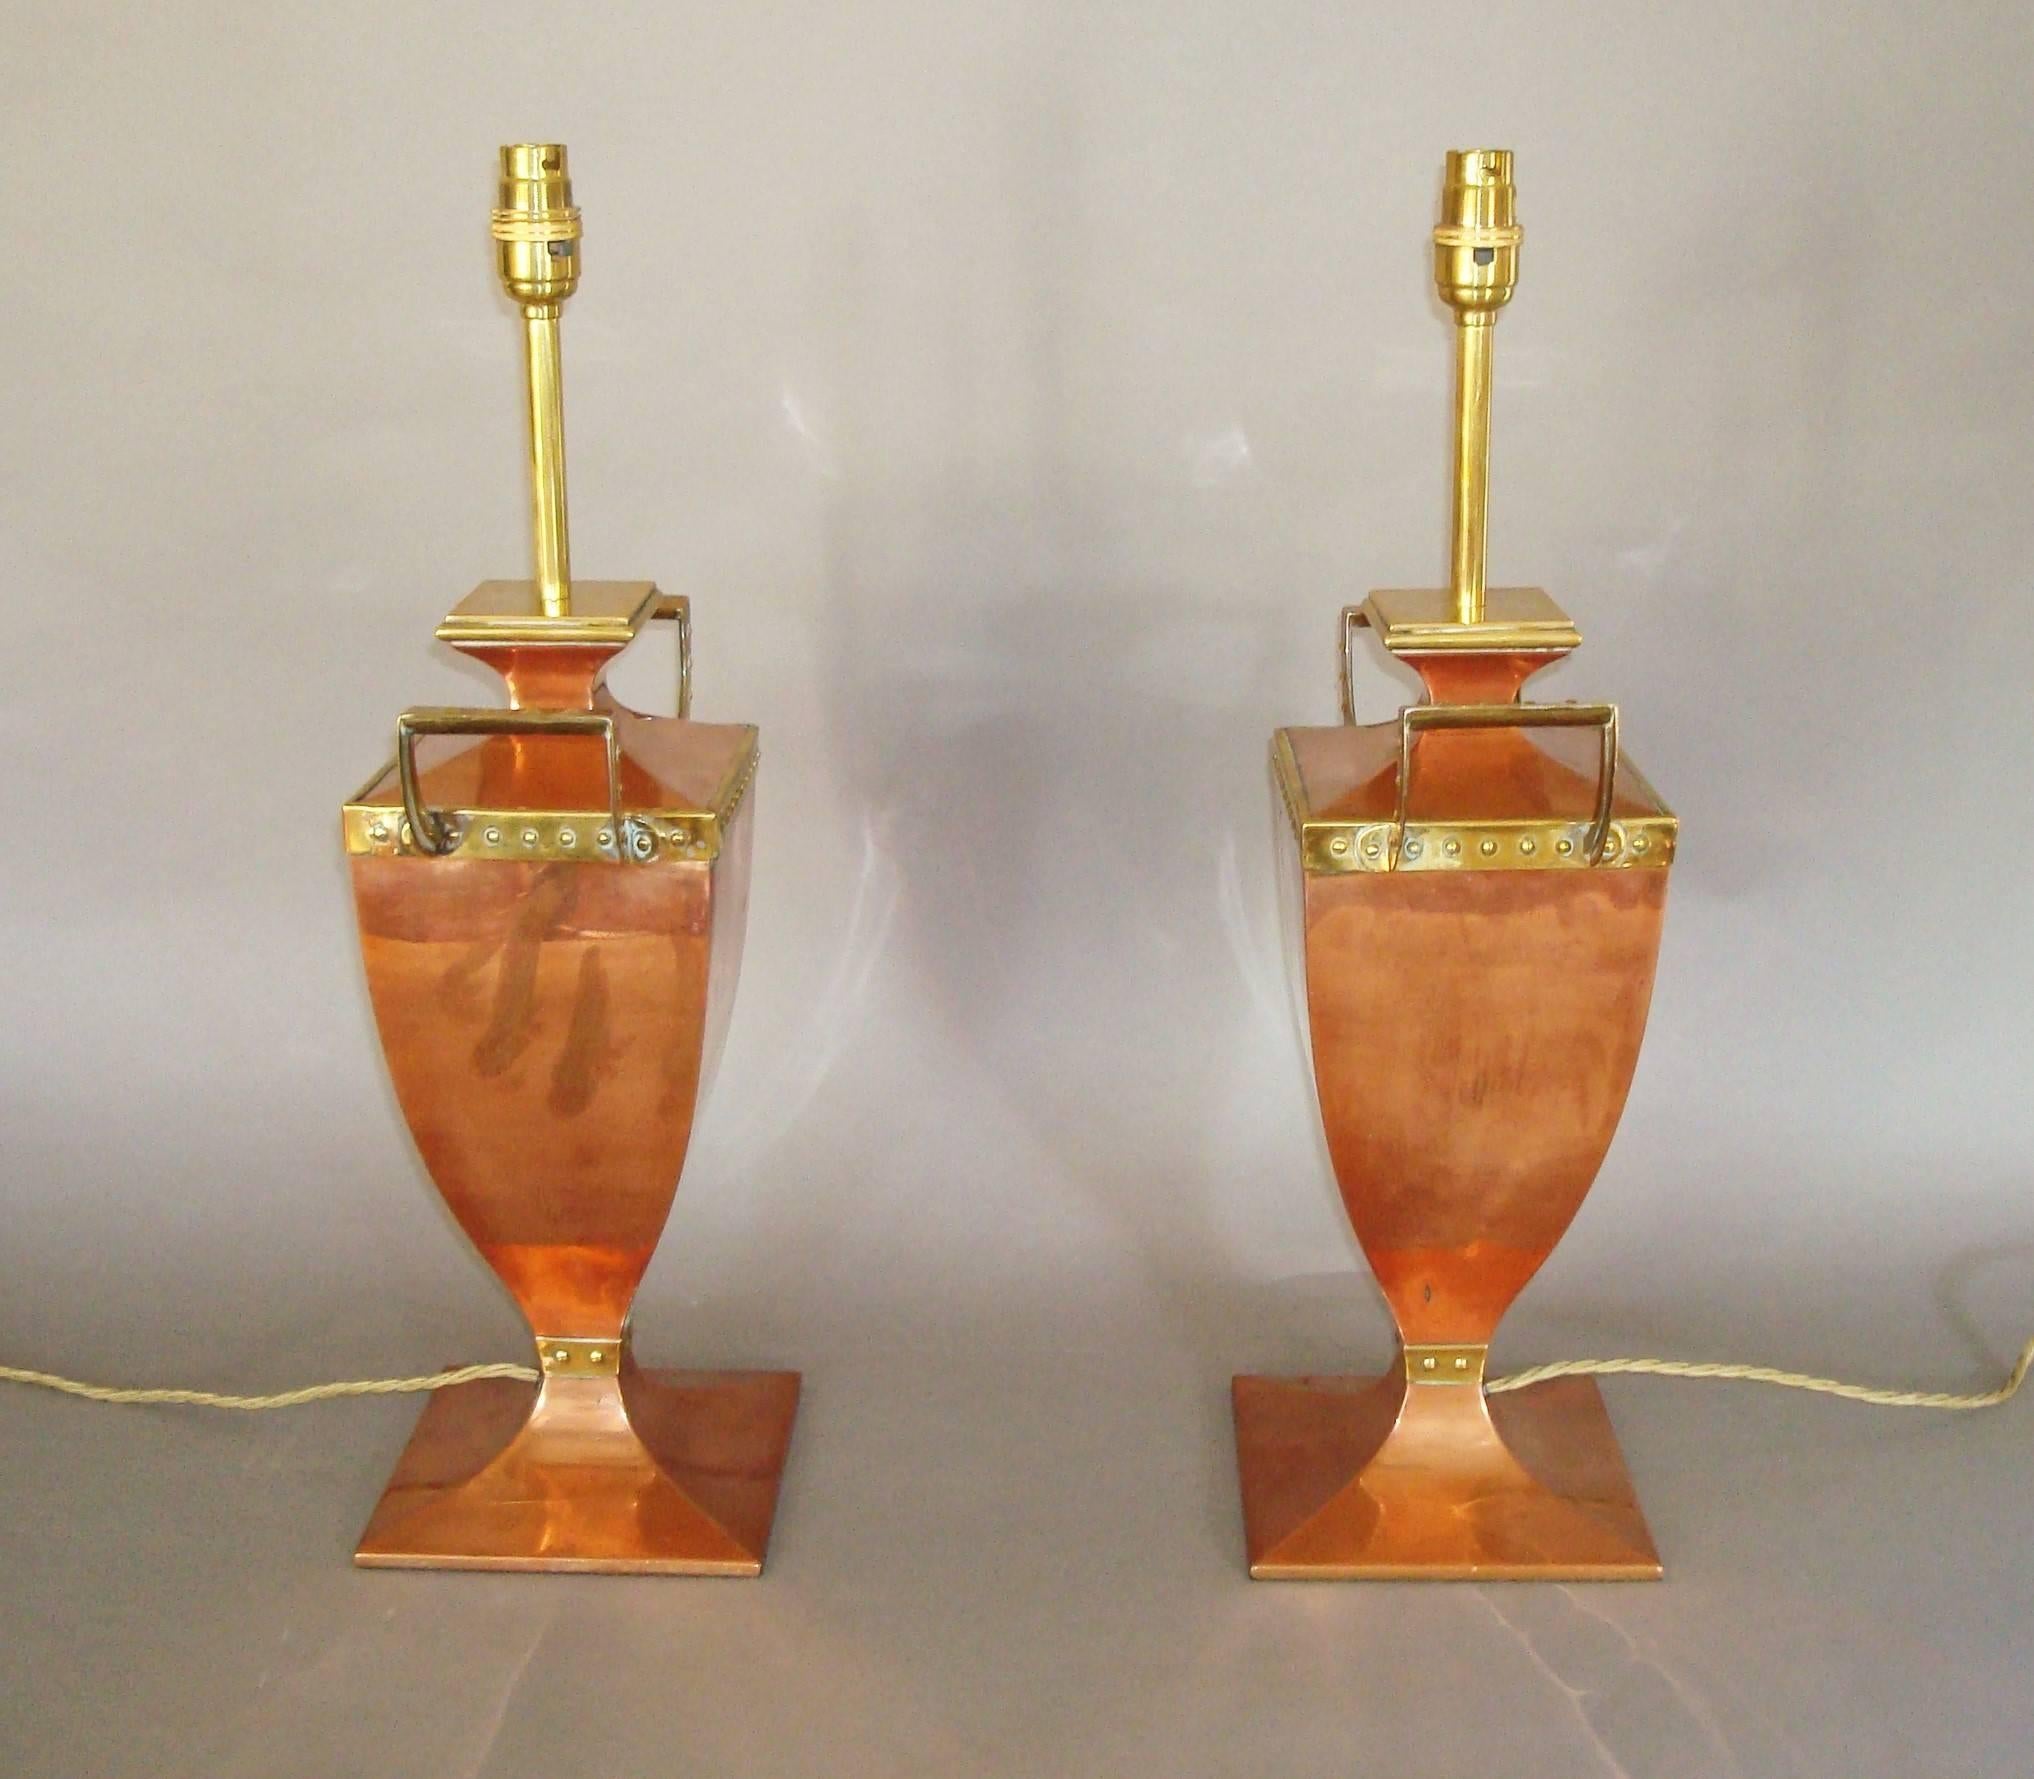 Early 20th Century Pair of Copper and Brass Lamps In Good Condition For Sale In Moreton-in-Marsh, Gloucestershire